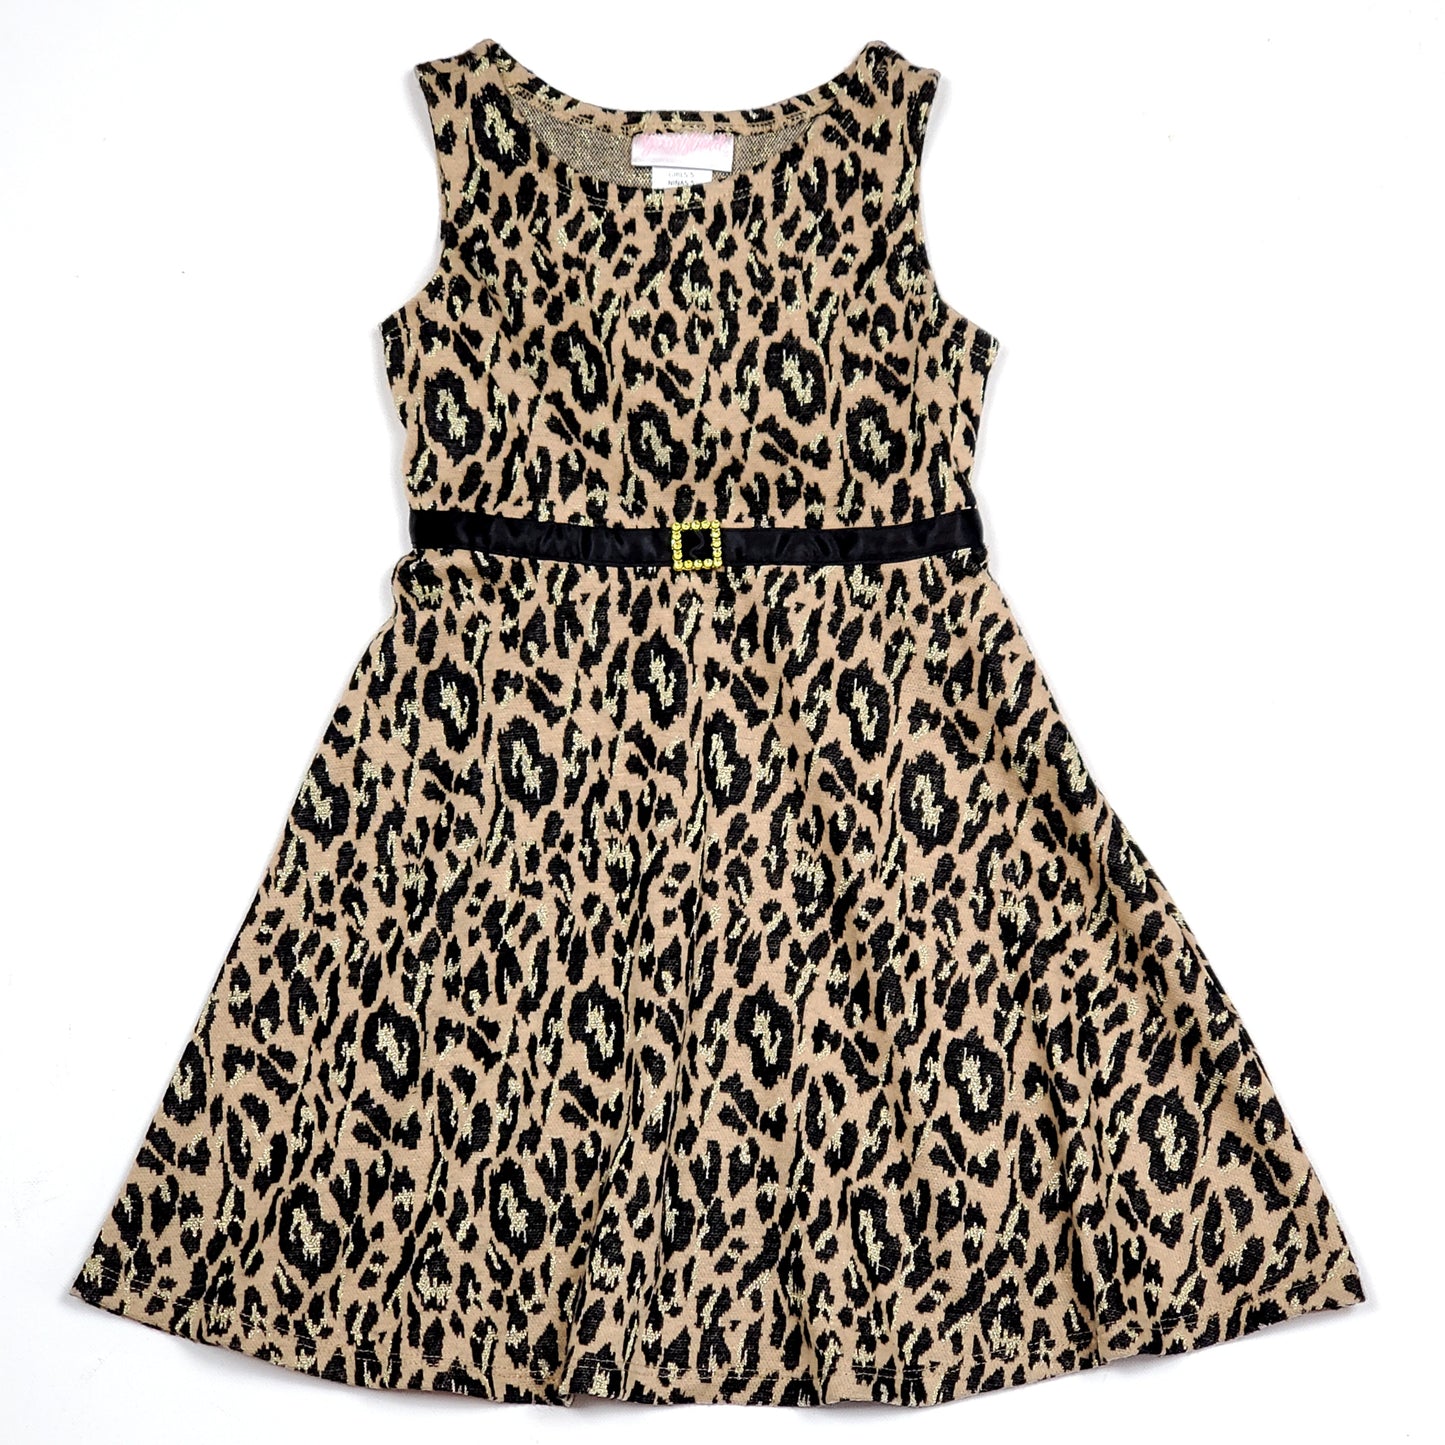 Youngland Girls Leopard Print Dress Size 5 Used View 1